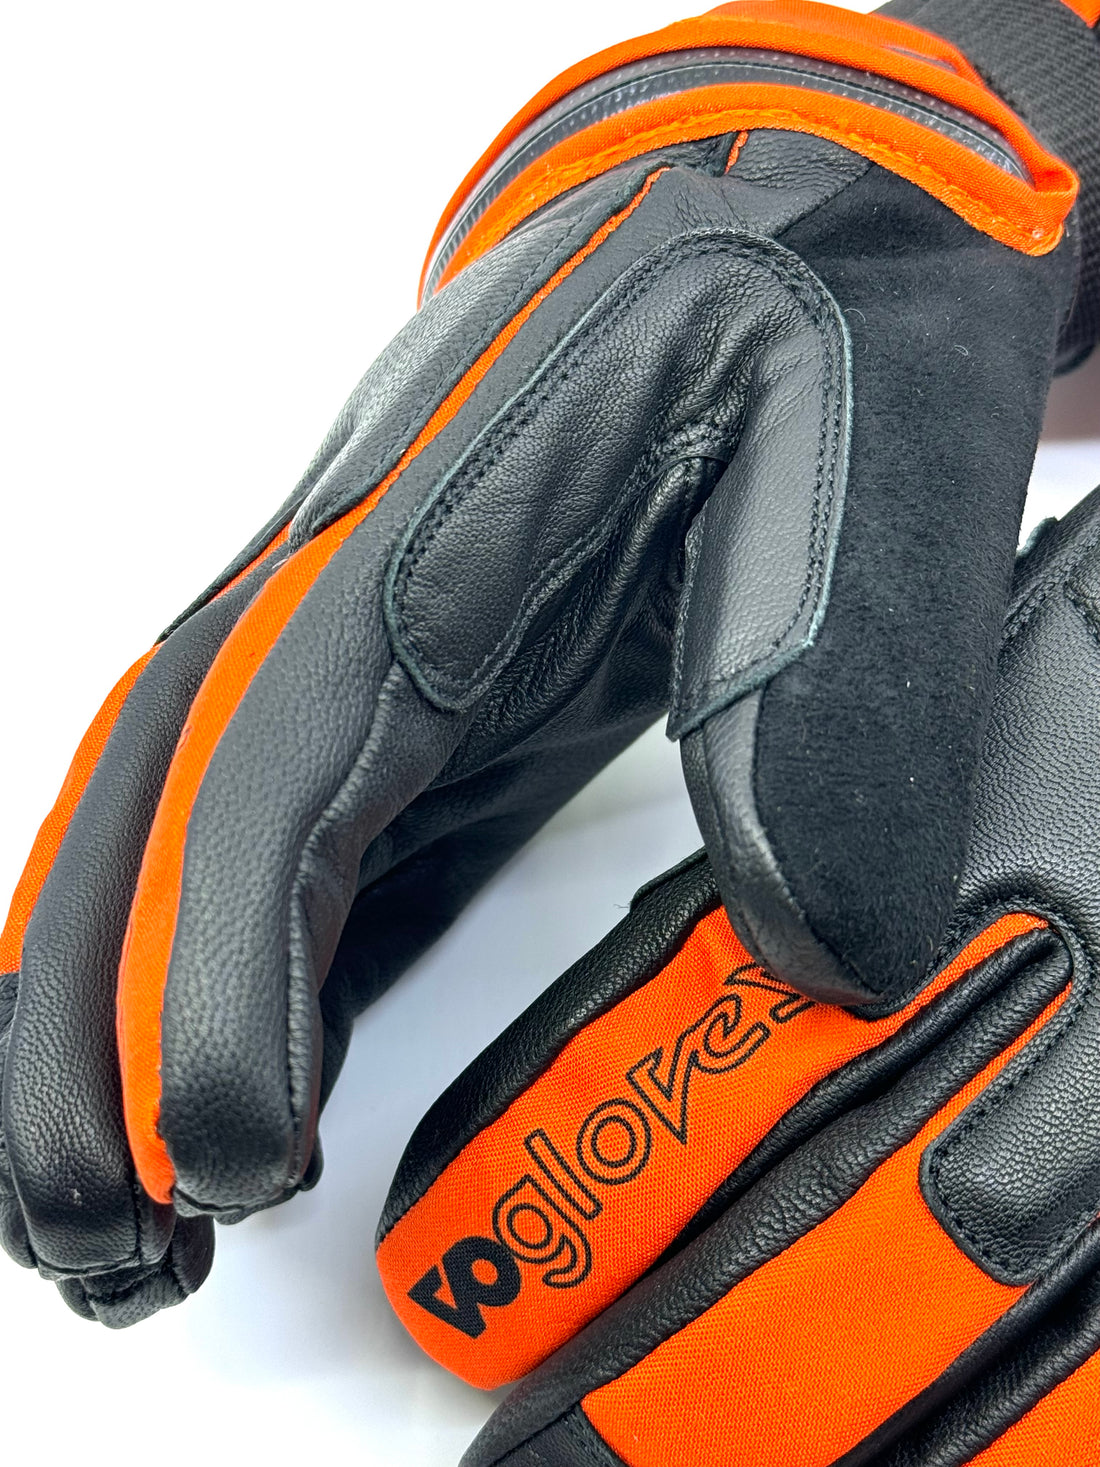 NEW! Orange and Black Extra Thin Palm Knuckle Pad Gloves